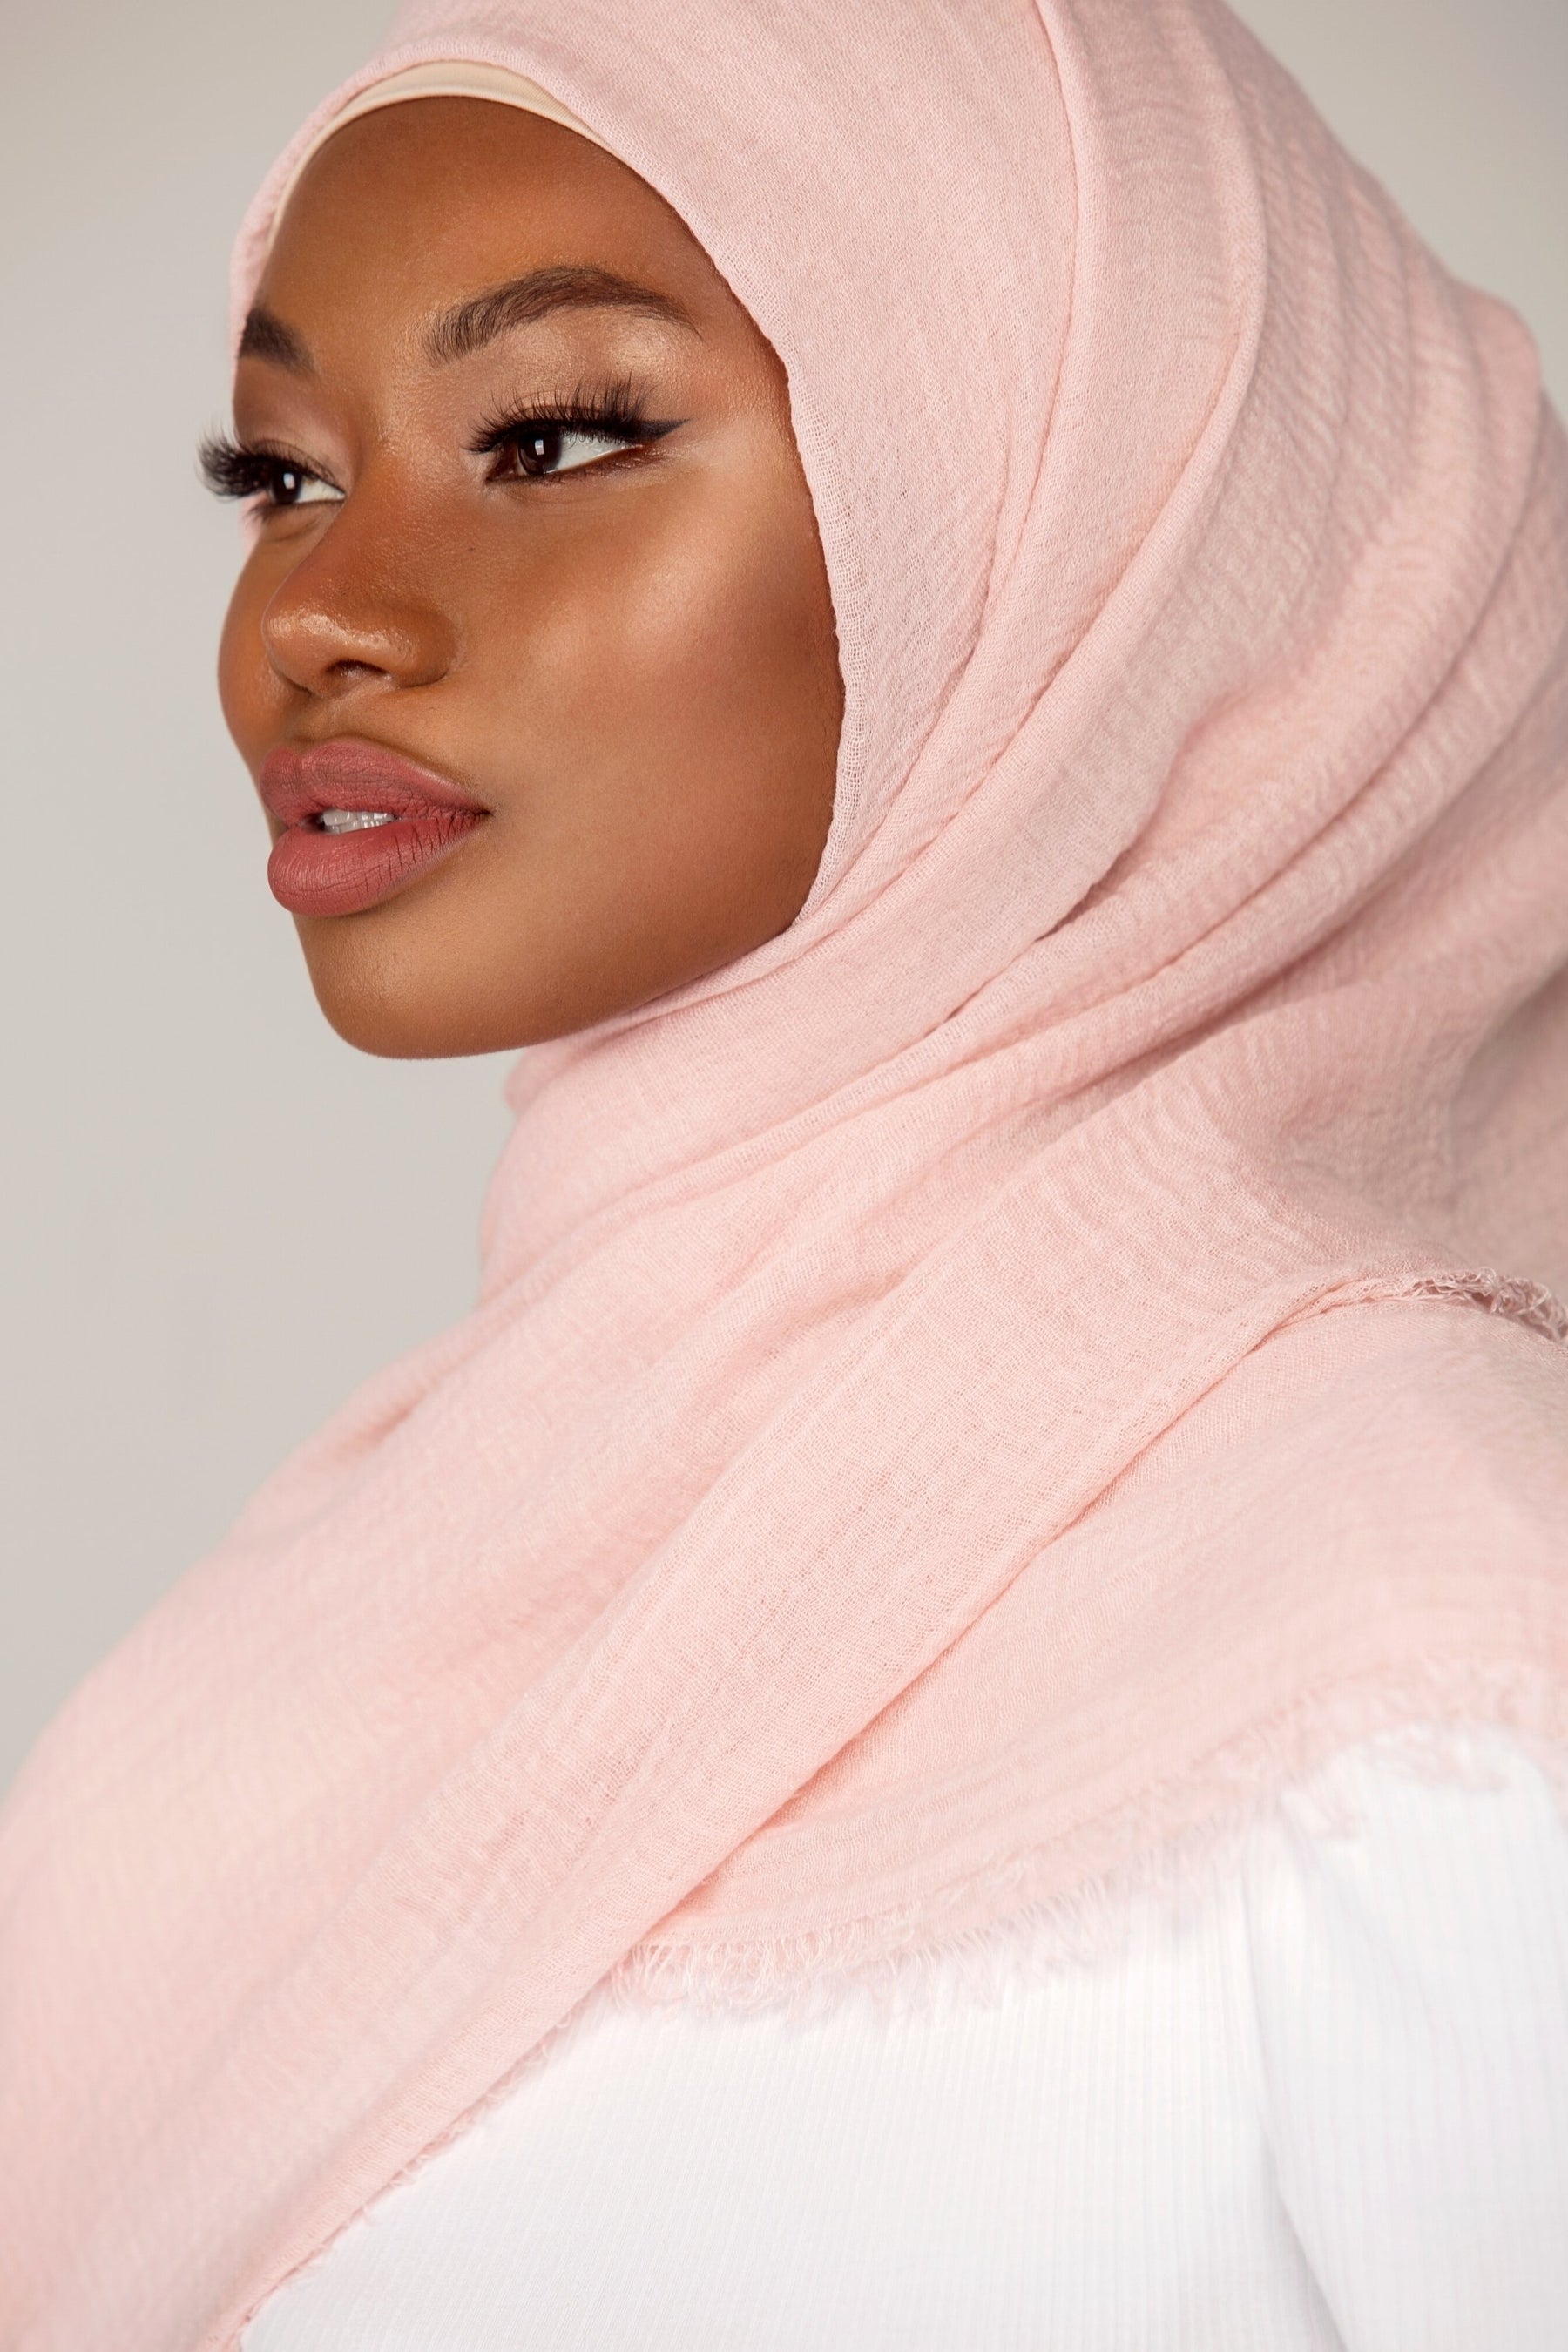 Everyday Crinkle Hijab - Pink Quartz Veiled Collection 